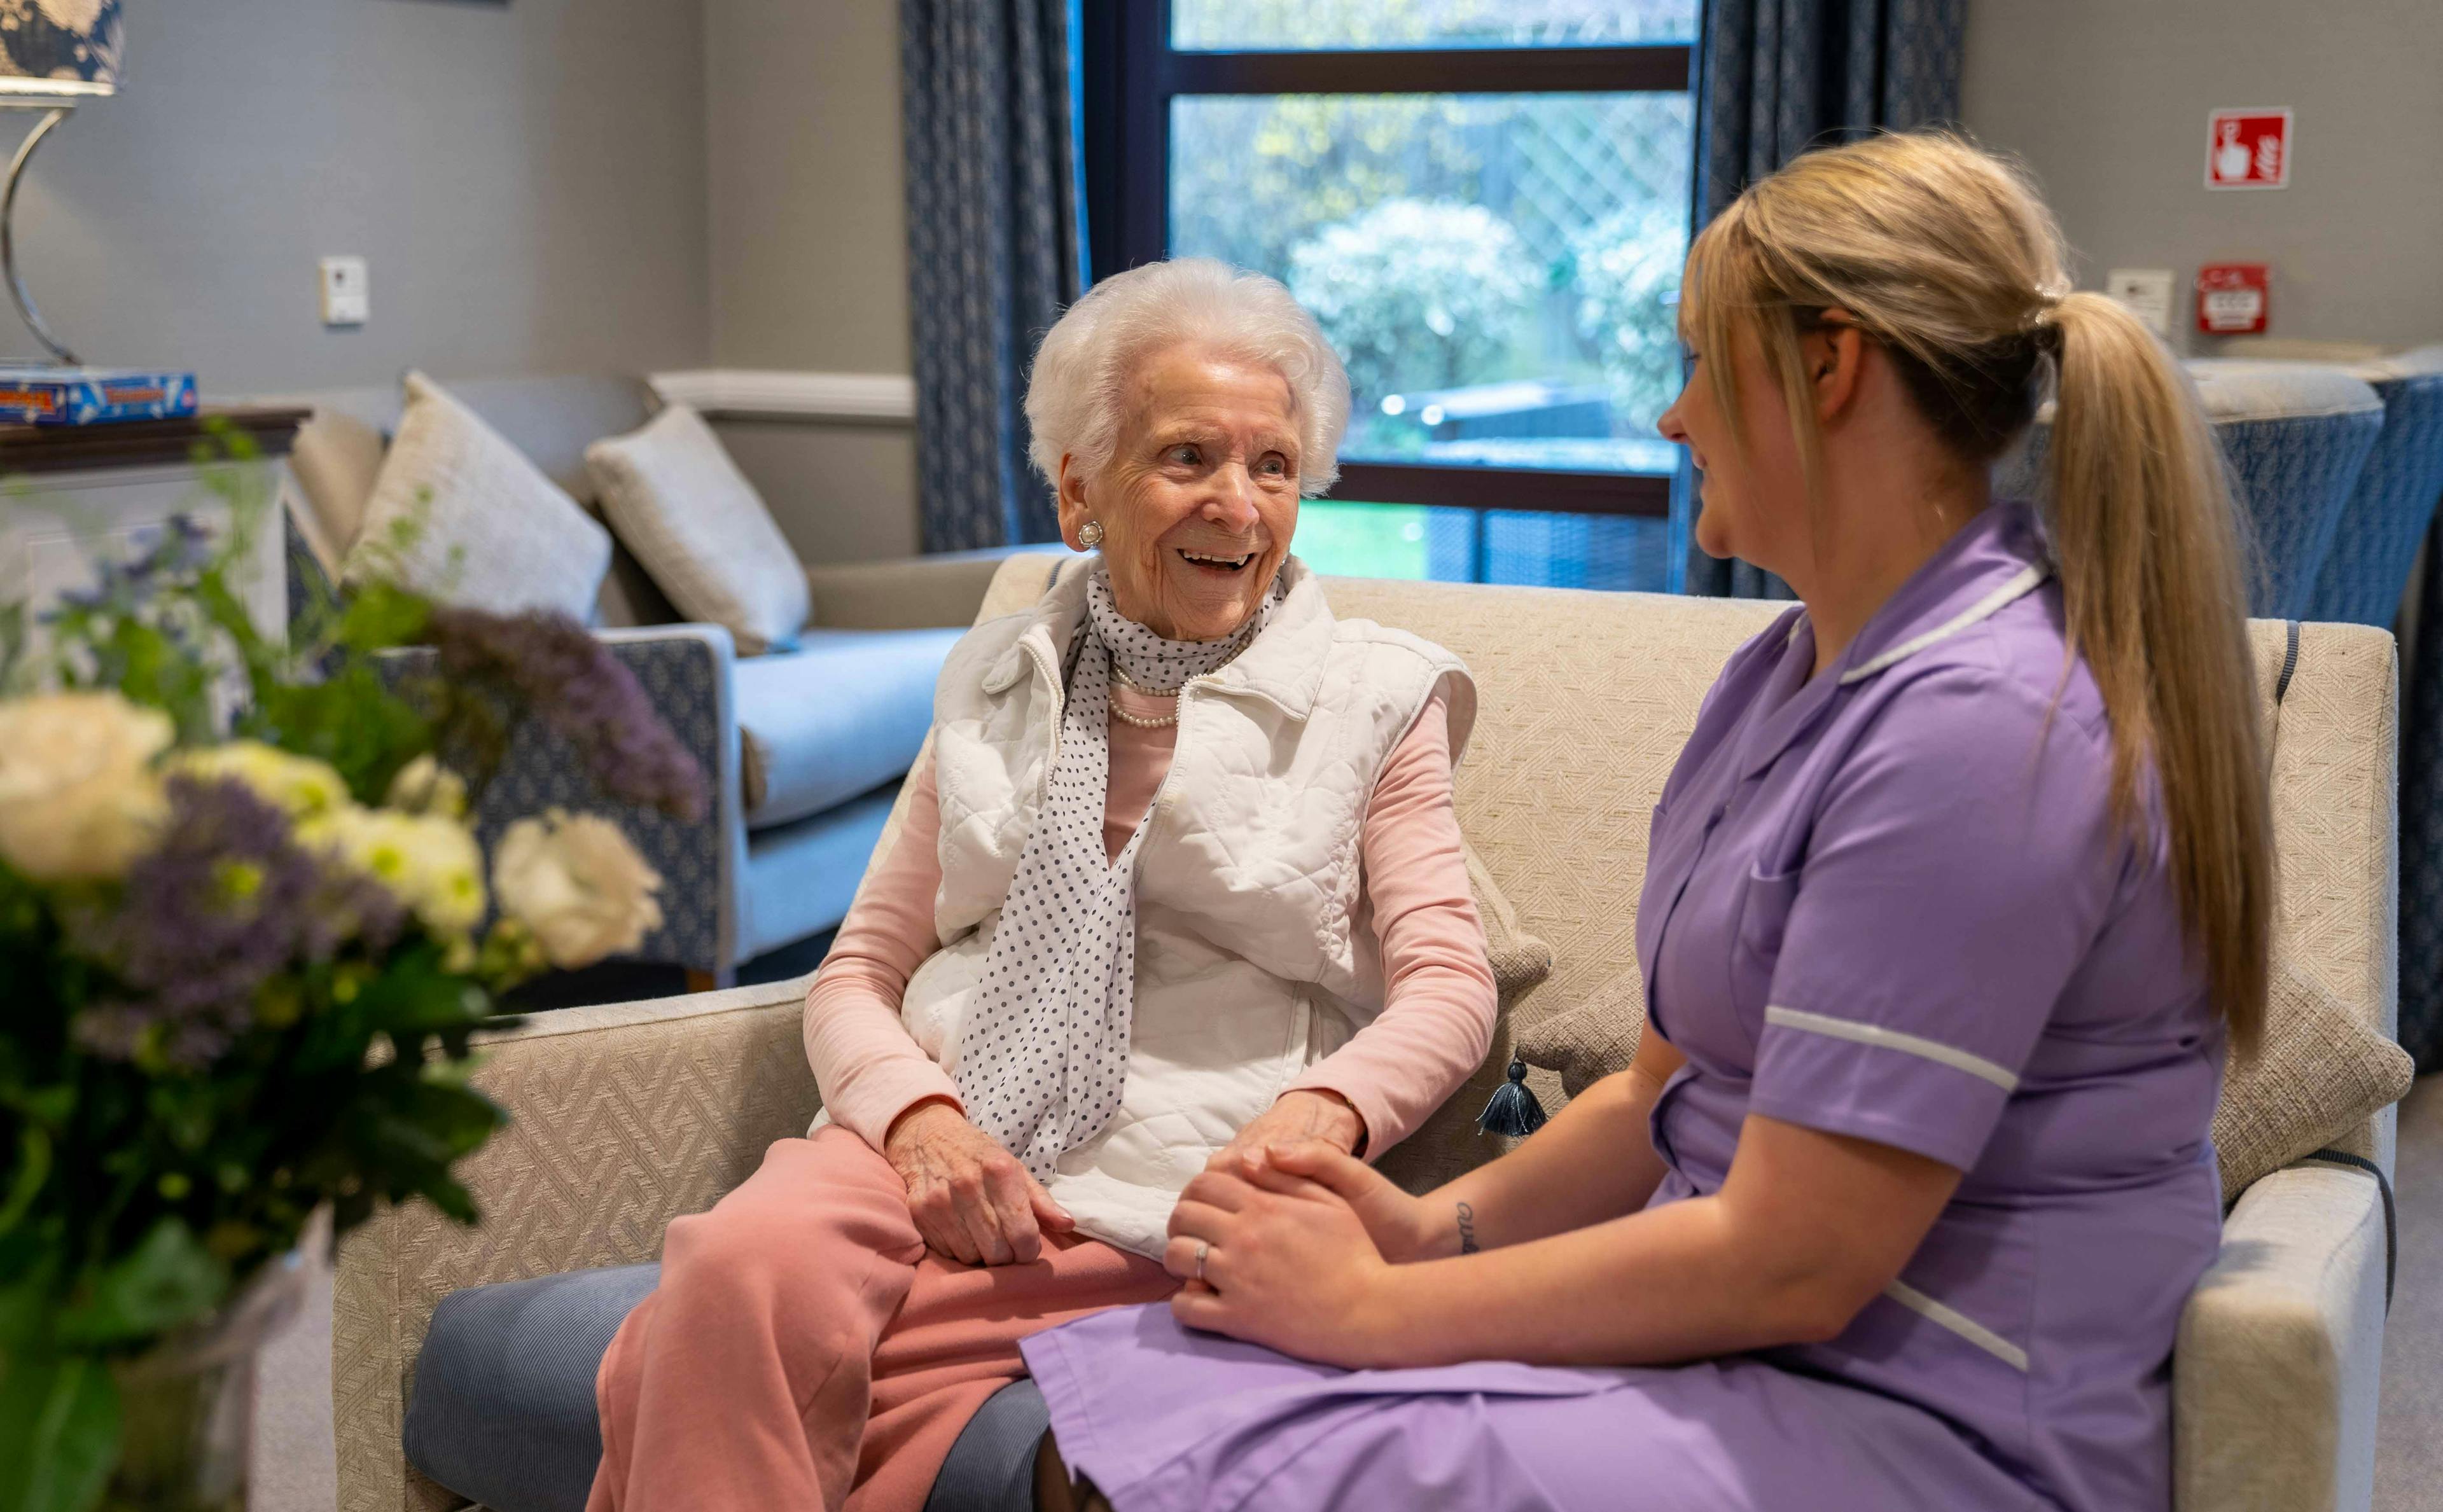 Porthaven Care Homes - Barley Manor care home 007